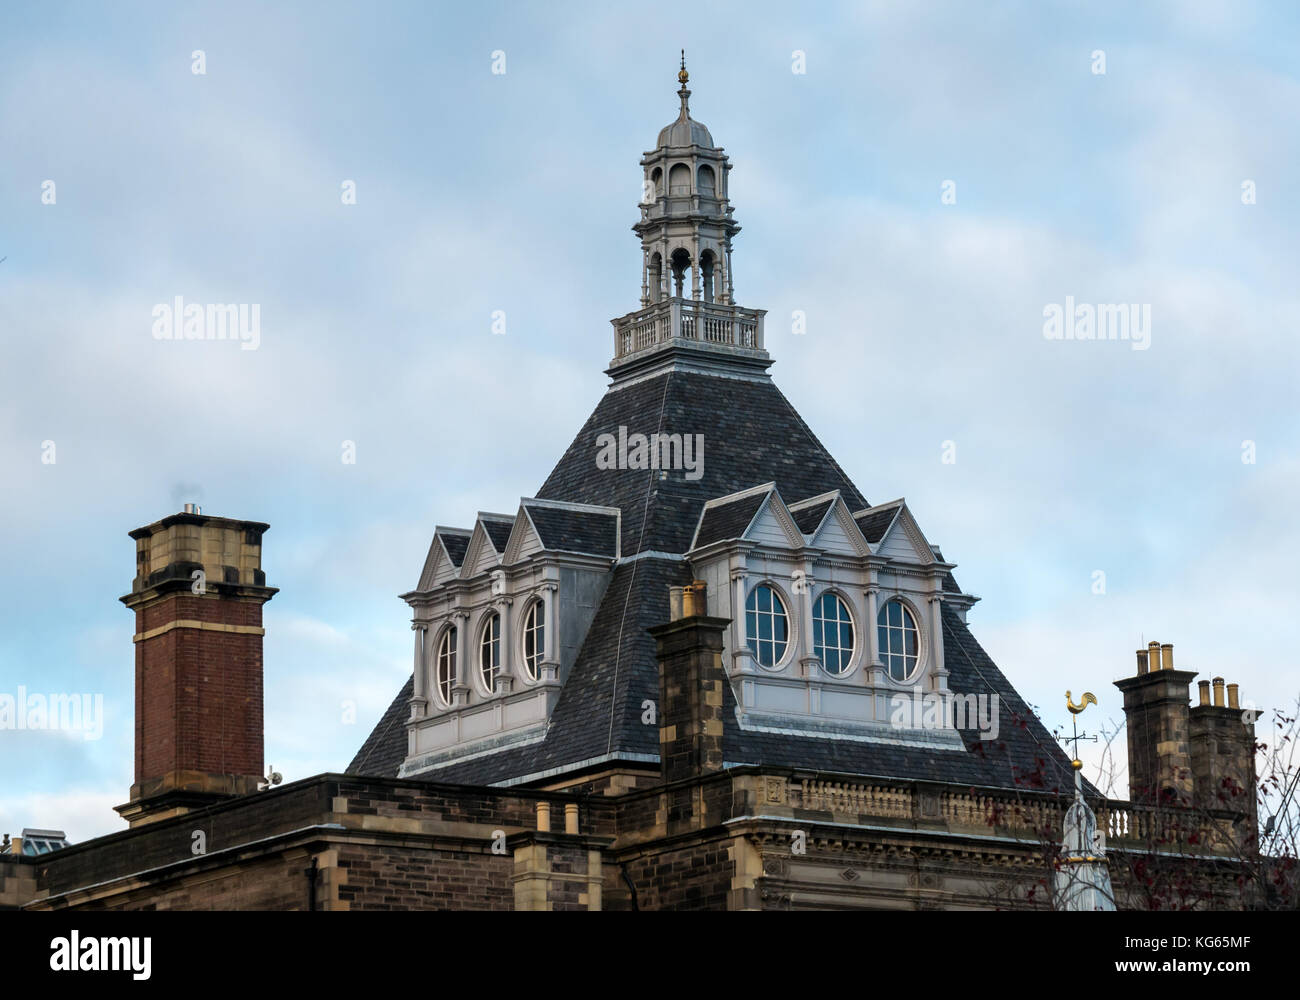 Ornate roof and spire of the Victorian Central Library building, funded by Andrew Carnegie, Edinburgh, Scotland, UK Stock Photo